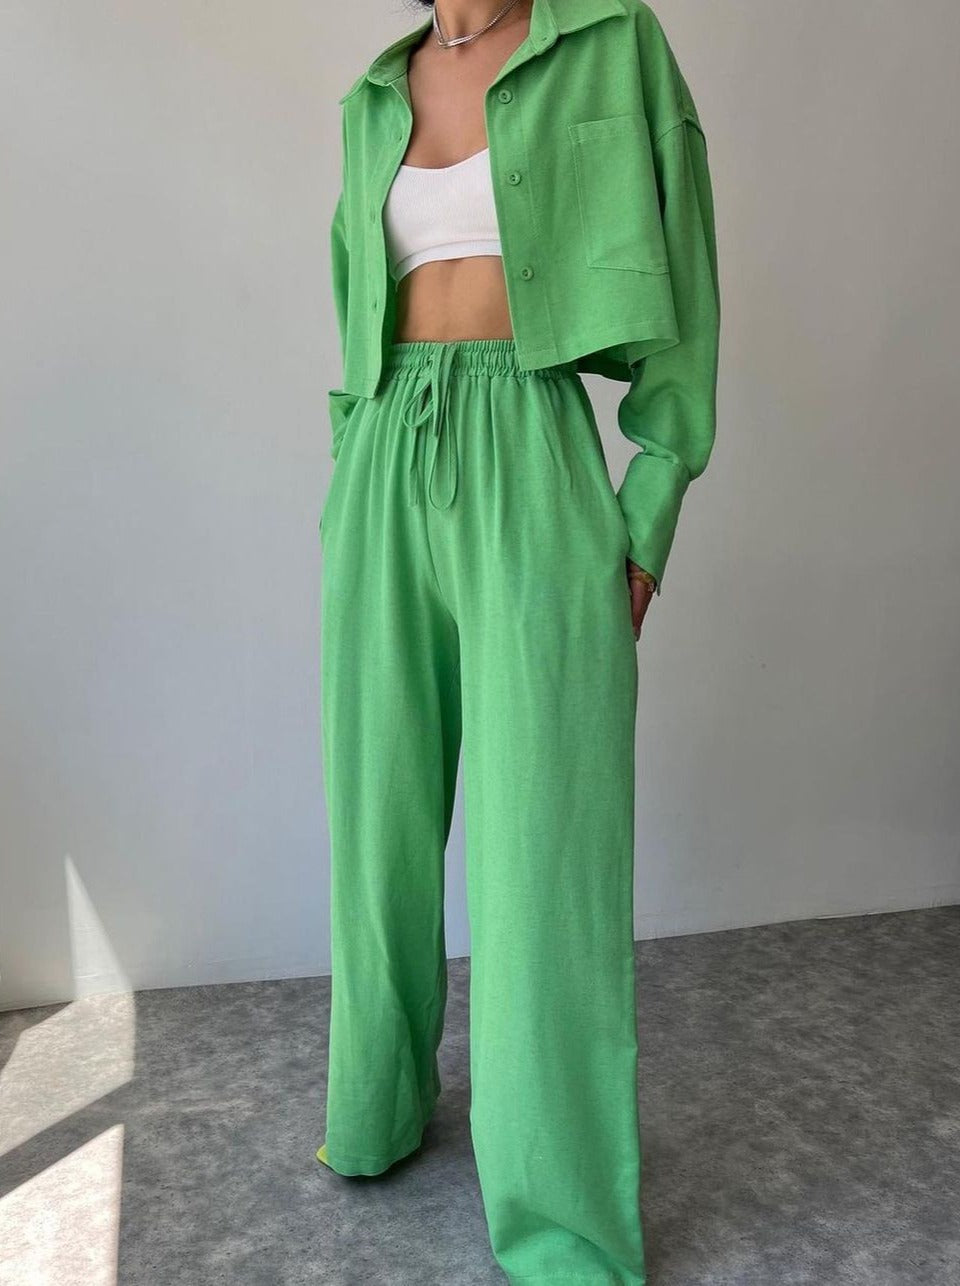 NTG Fad SUIT Green / L Solid Color Long Sleeve Short Casual Shirt Drawstring Trousers Set